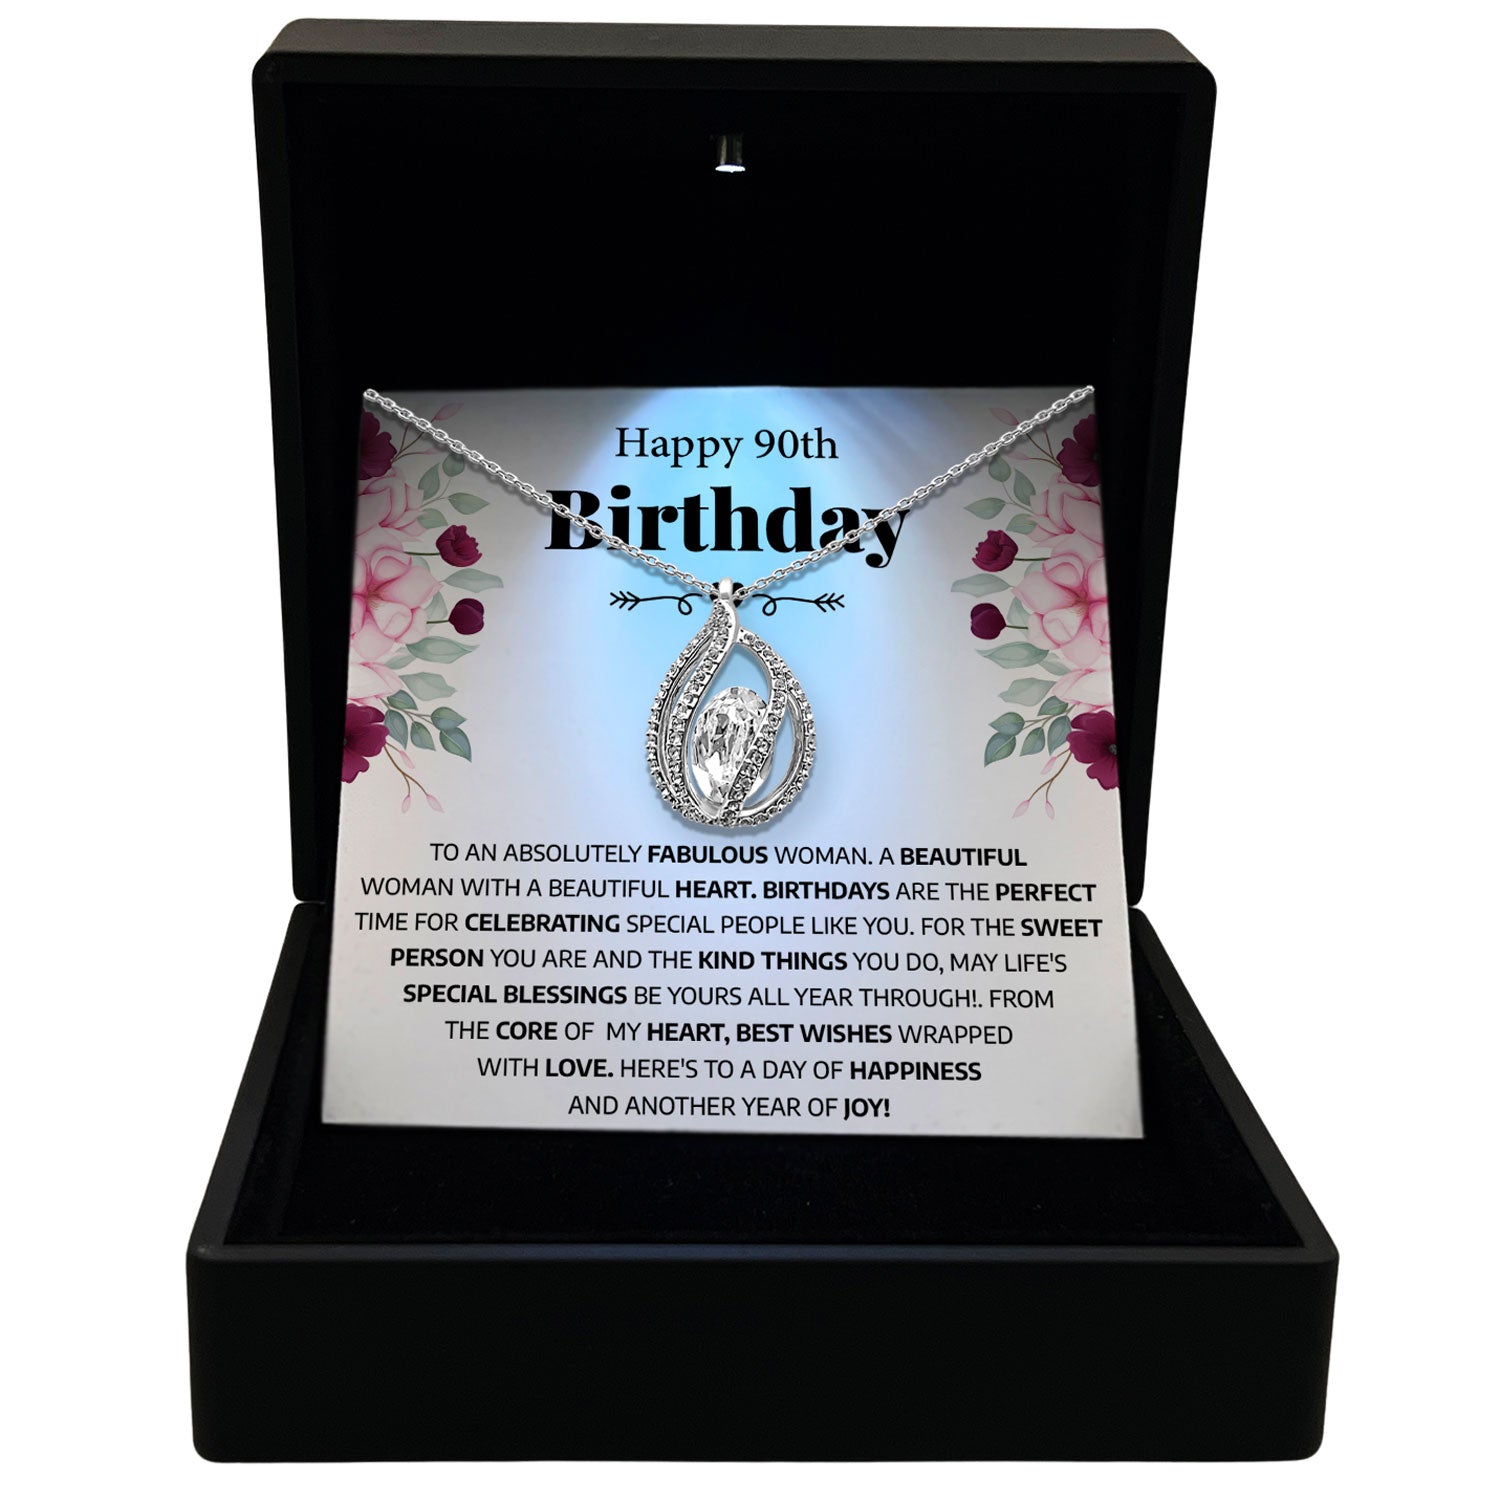 90th Birthday Gifts for Her - Orbital Birdcage Necklace